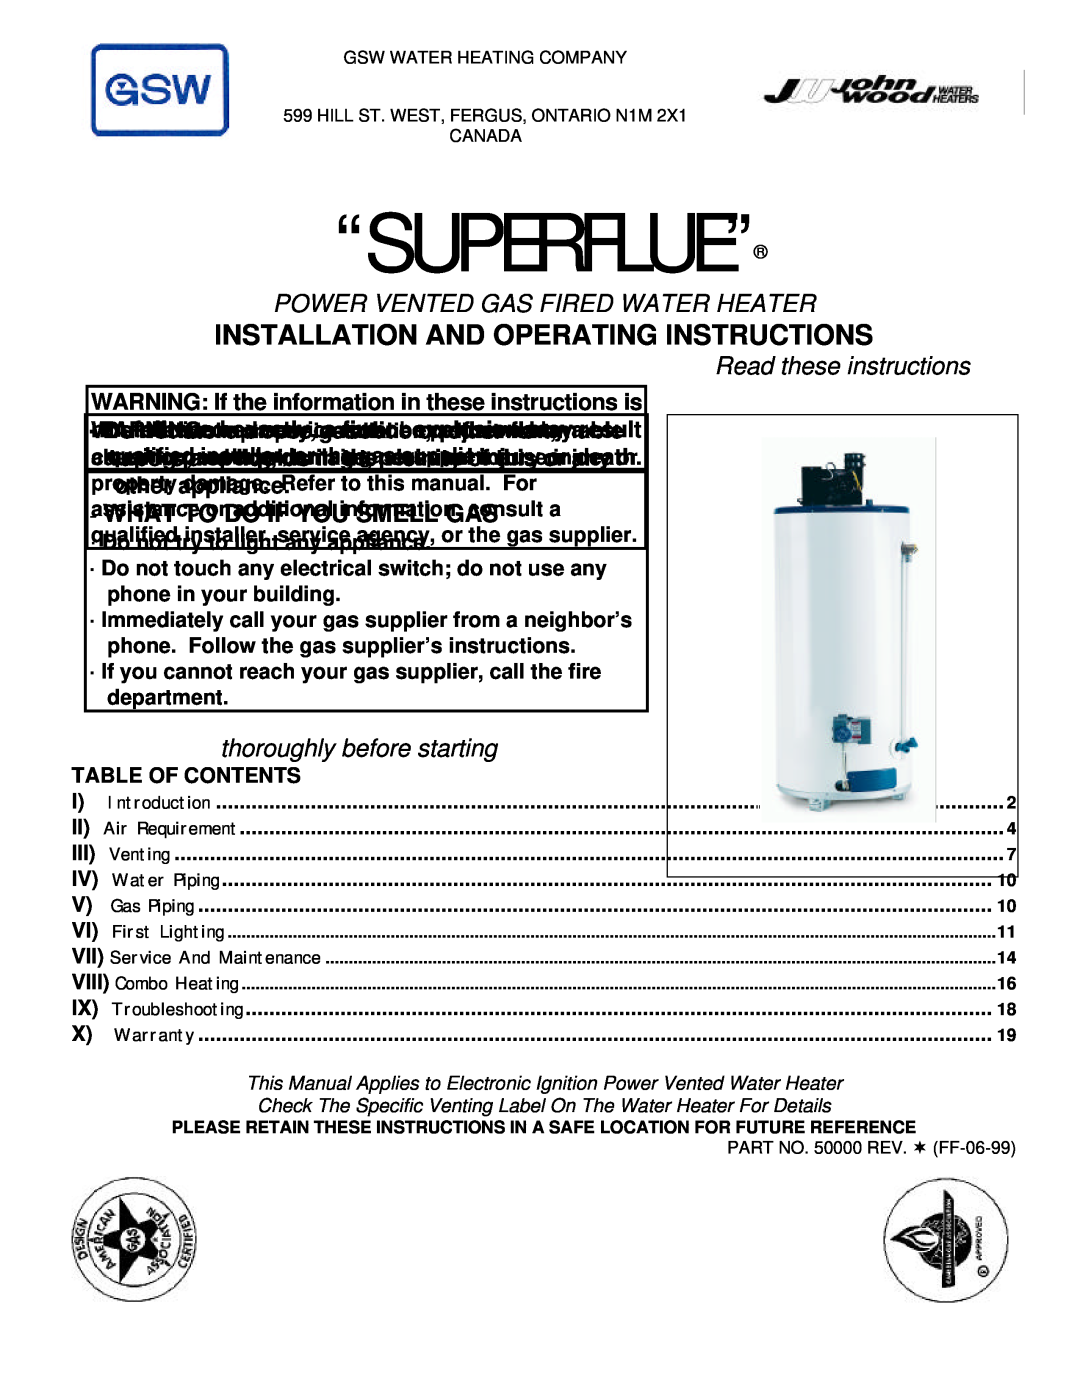 GSW POWER VENTED GAS FIRED WATER HEATER operating instructions “Superflue”, Installation And Operating Instructions 